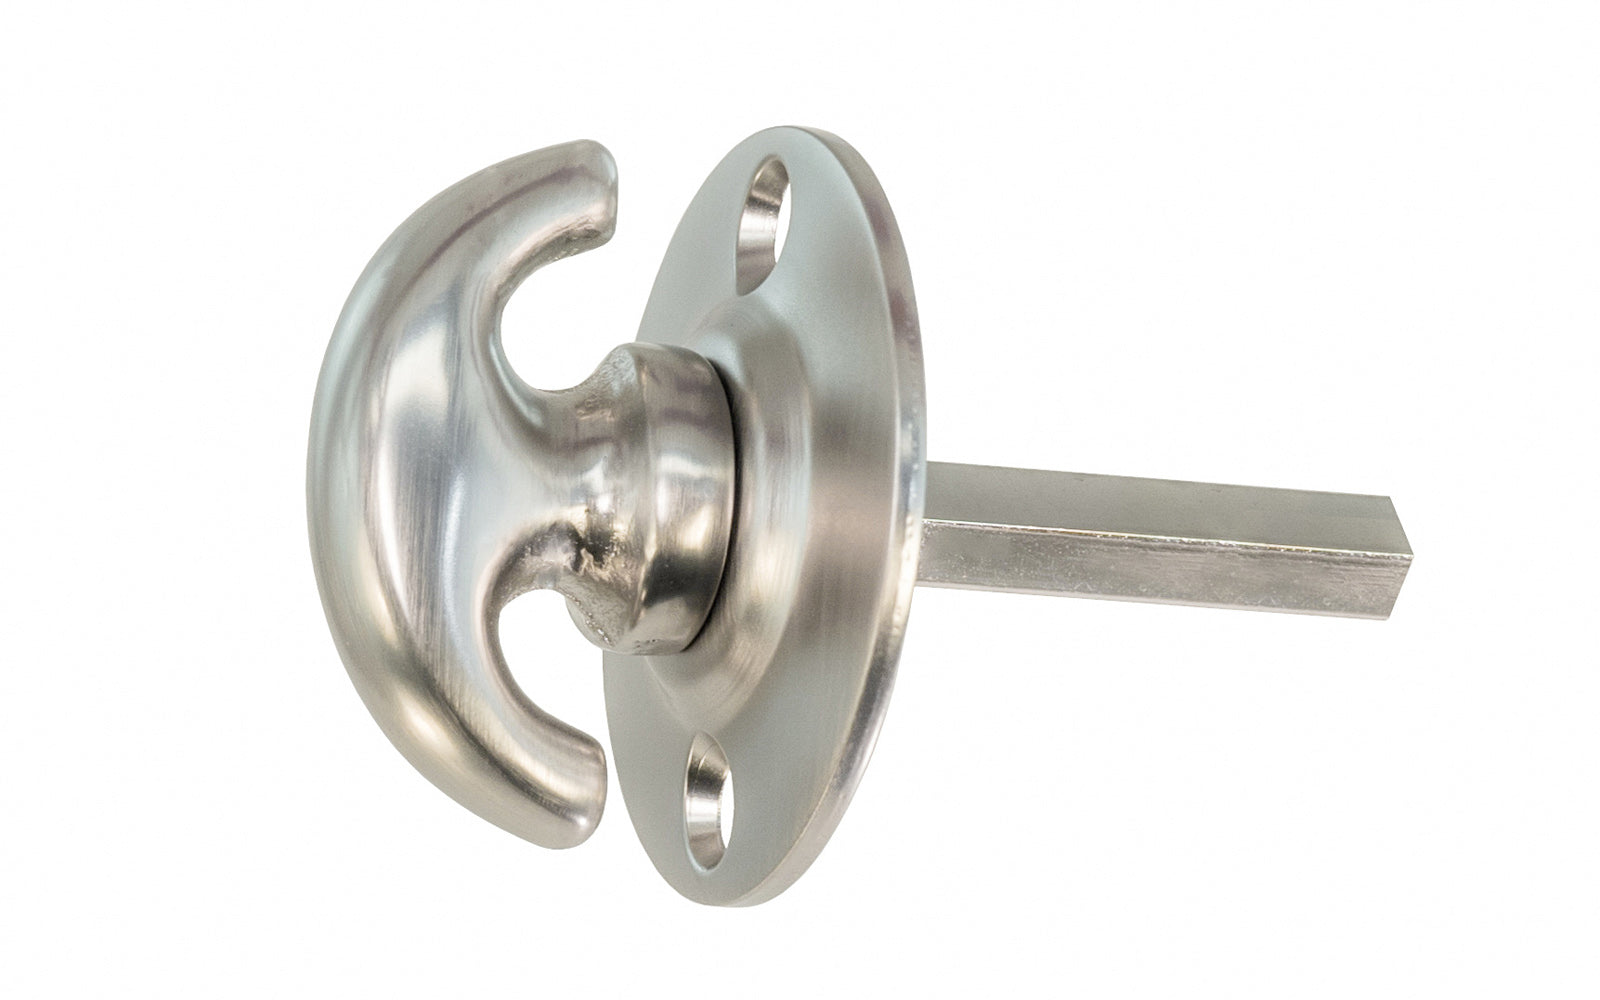 An old-style Classic Solid Brass crescent thumbturn with round plate for locking doors. Used with mortise locks, deadbolts, night-locks, catches. Made of solid brass material. 3/16" thick shaft. Brushed nickel finish